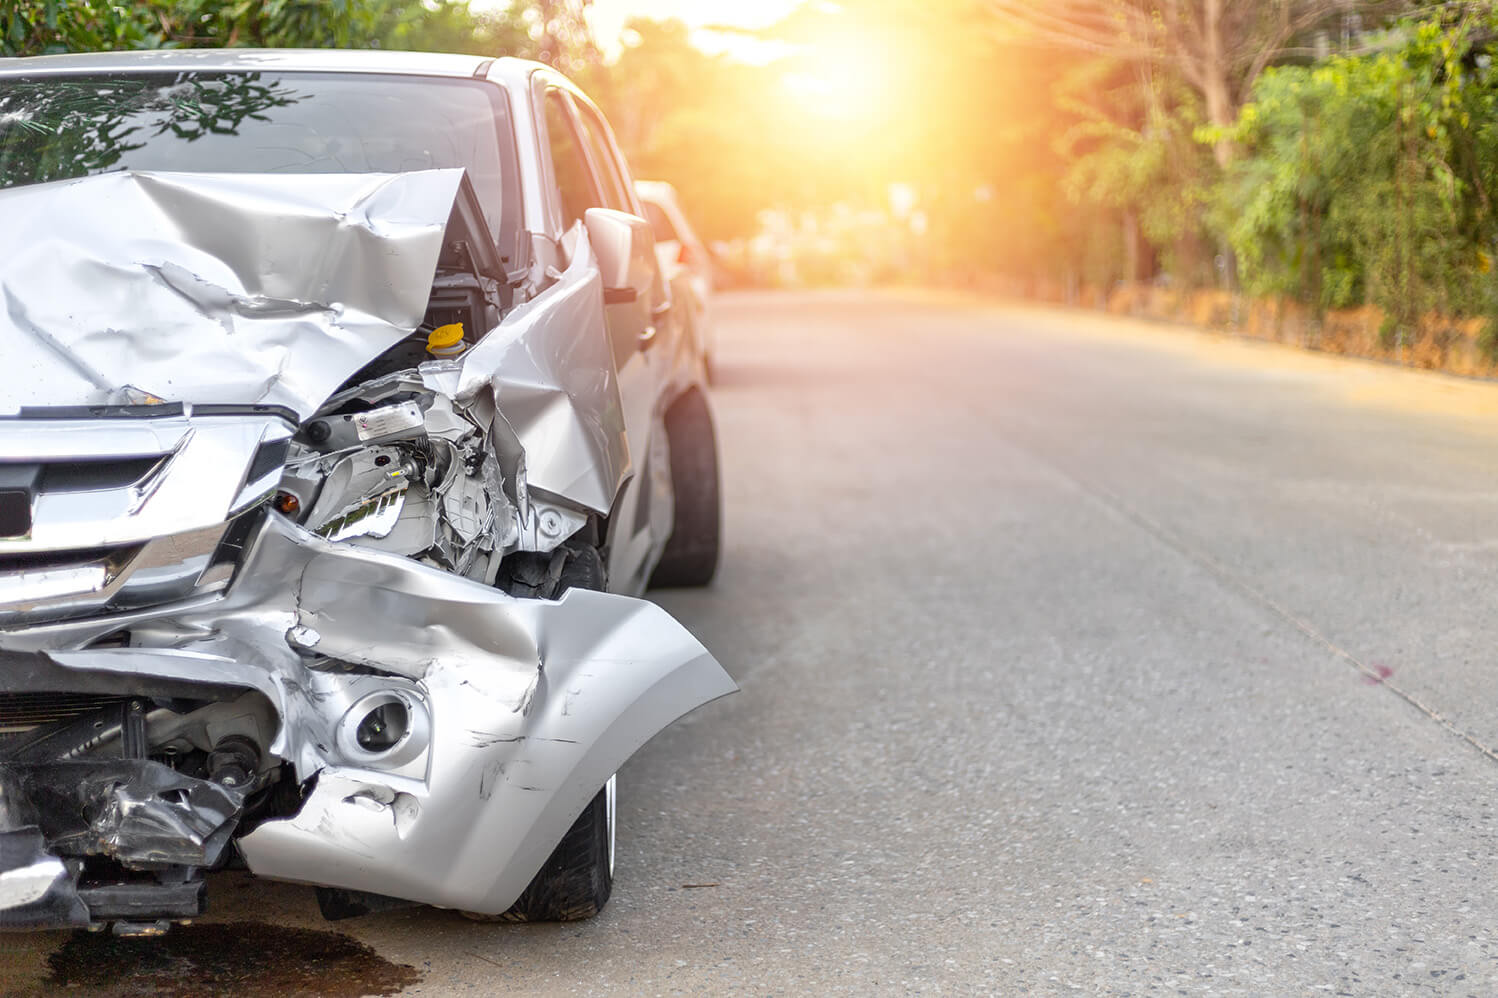 Chiropractor help with car accidents